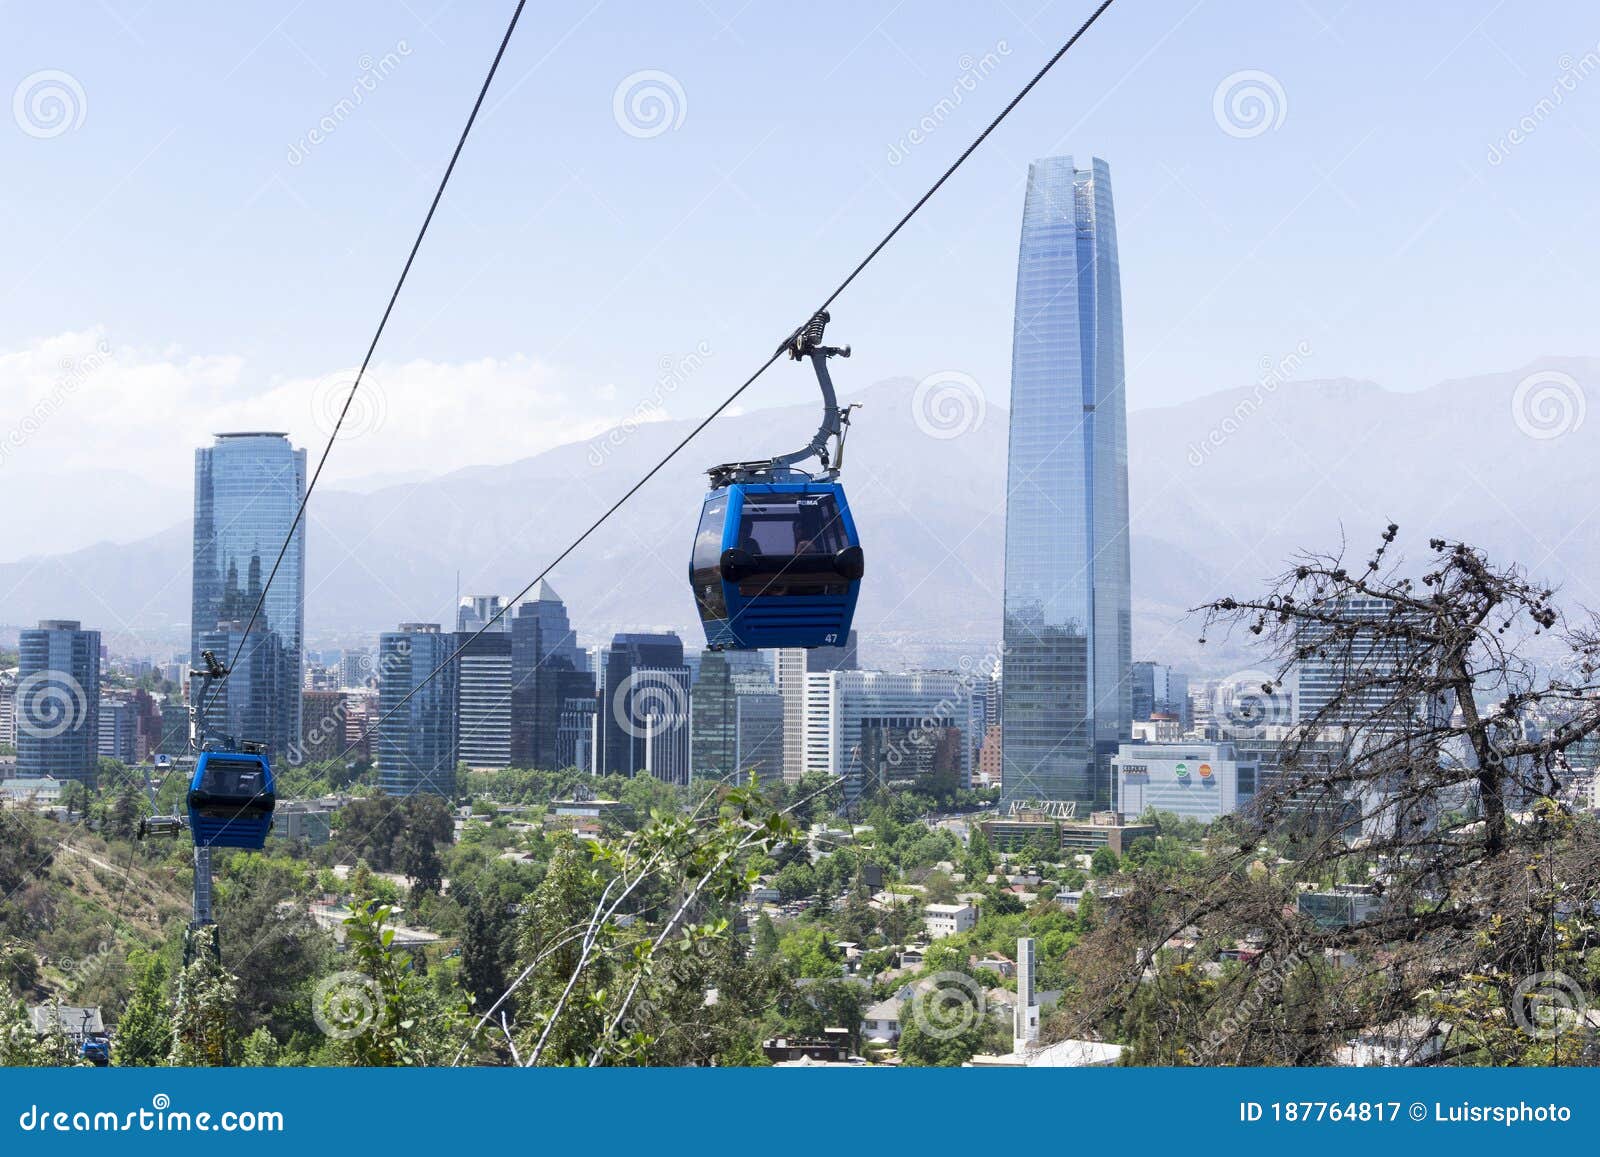 santiago de chile view, with the cable car in the foreground